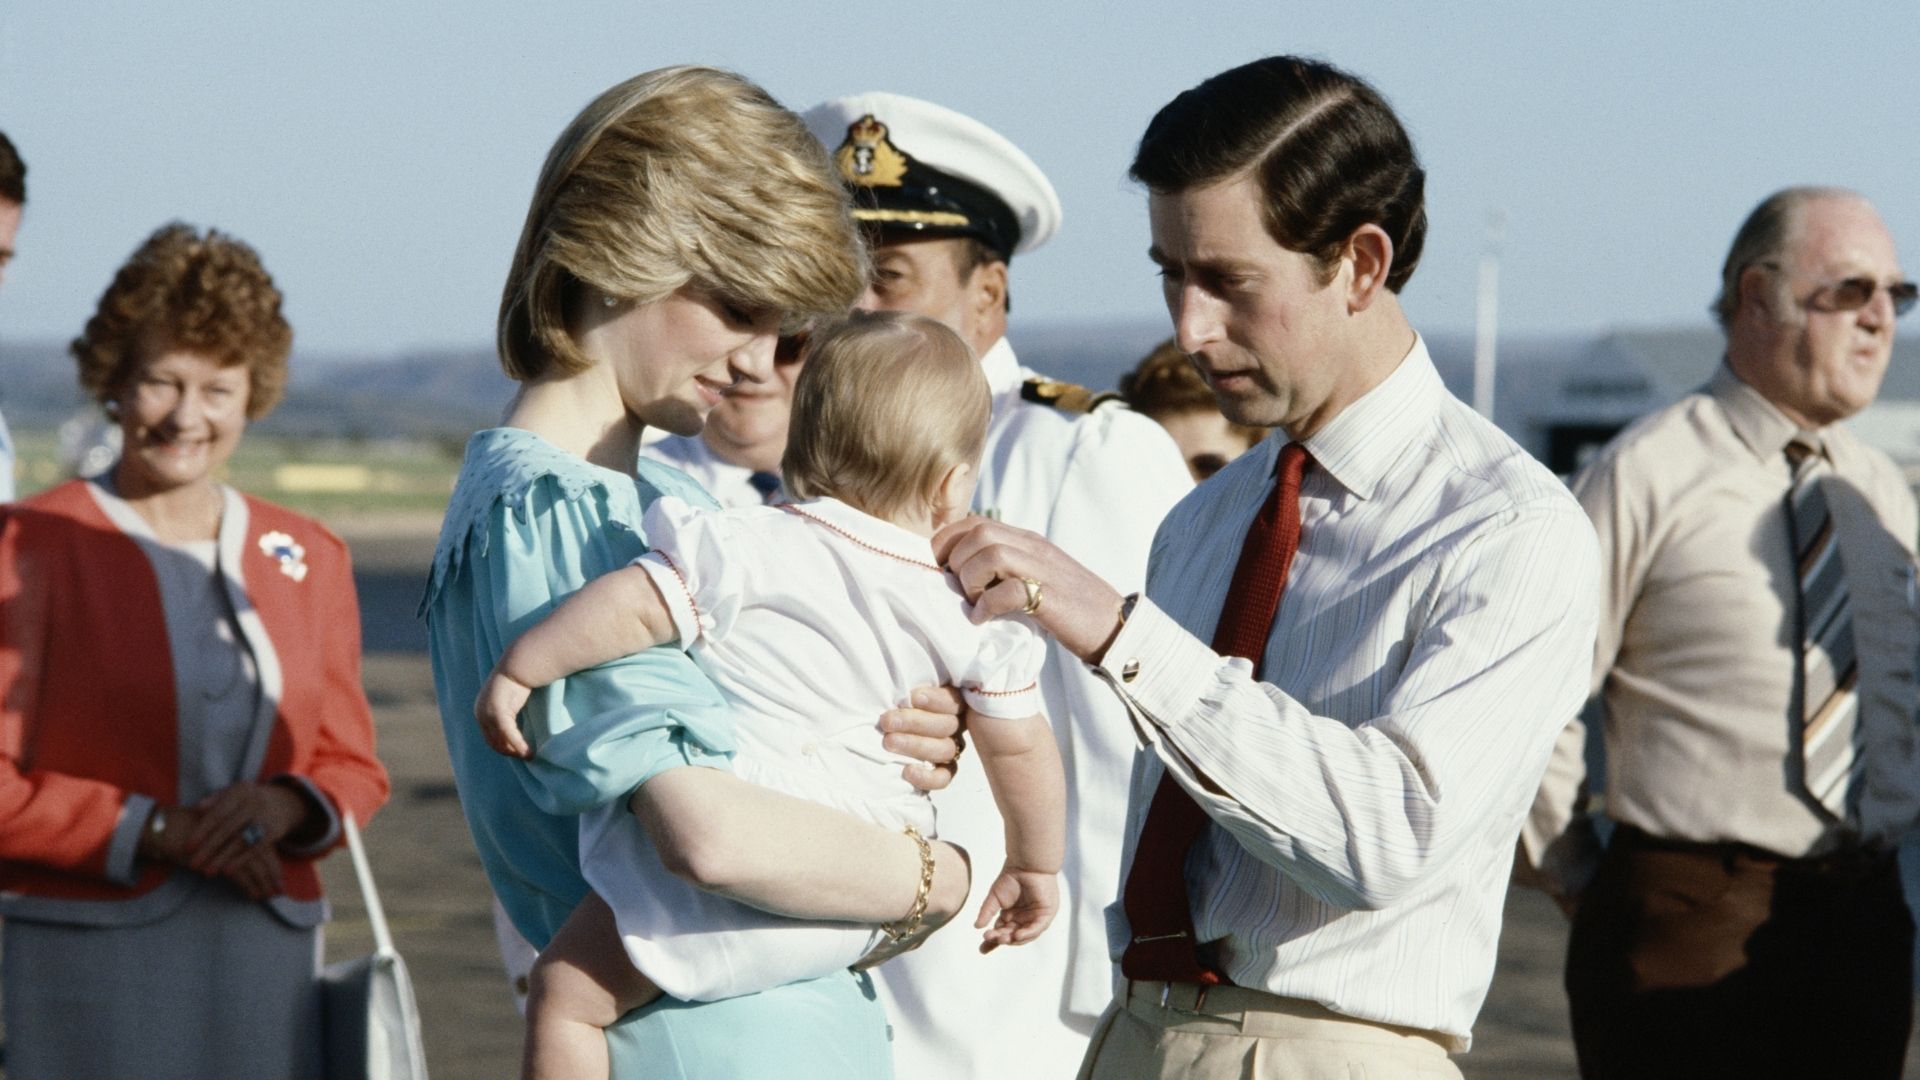 <p>                     For their very first royal tour together as a married couple, Prince Charles and Princess Diana visited Australia and New Zealand in 1983. By then they were parents to a baby Prince William. Ignoring the royal tradition to leave the children behind, Diana insisted they bring him along. Of course, he stayed with a nanny when the two were out completing royal duties, but it was an early sign of Diana's loving parenting style.                   </p>